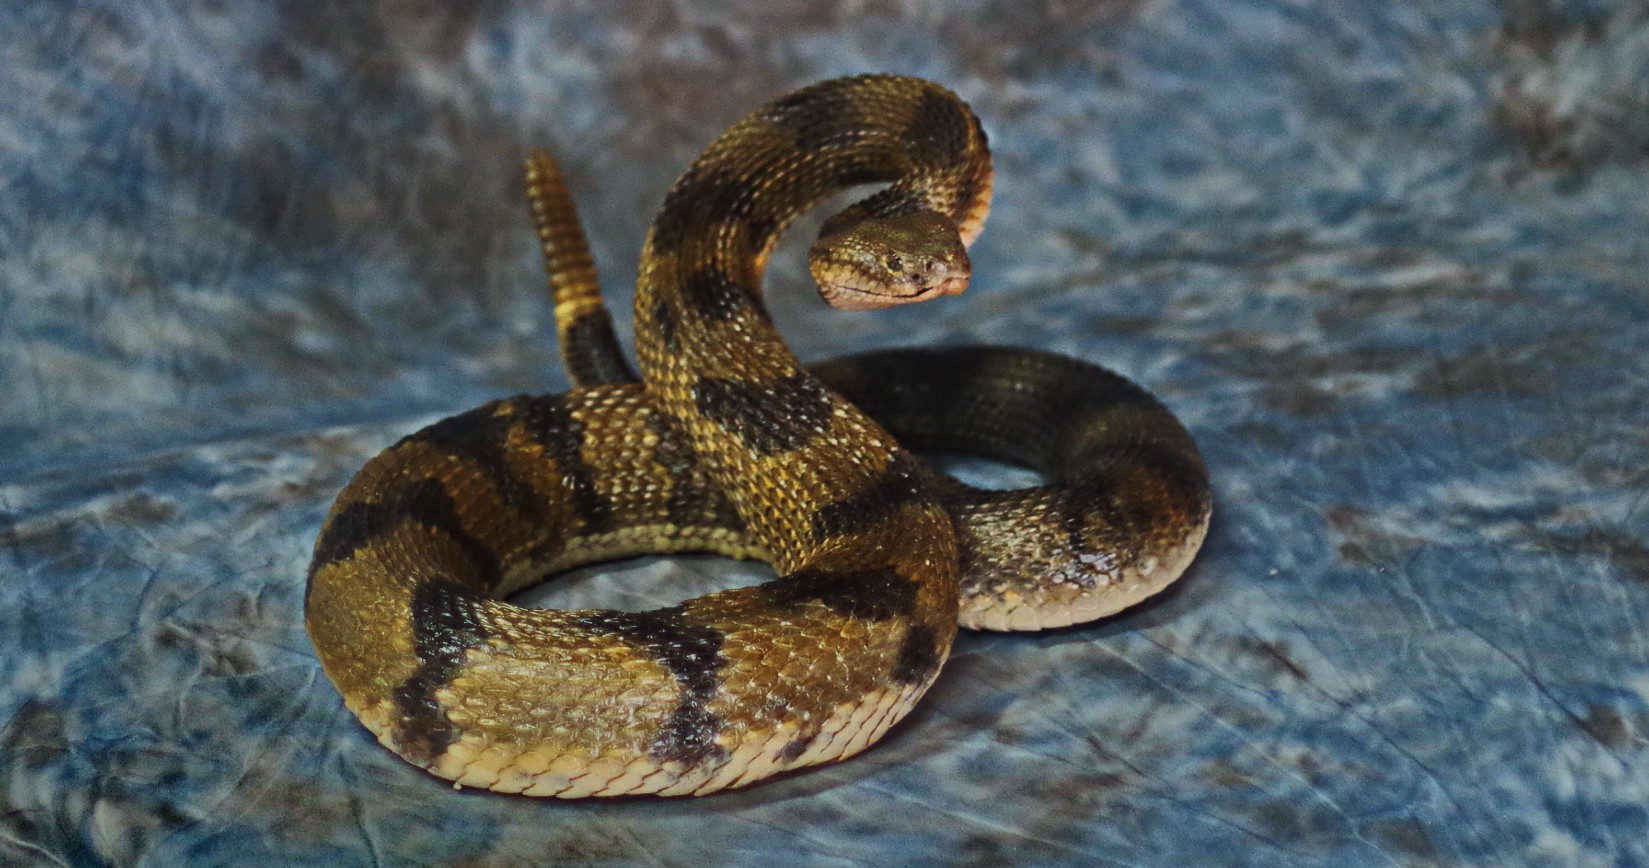 yellow phase timber rattler from Pennsylvania